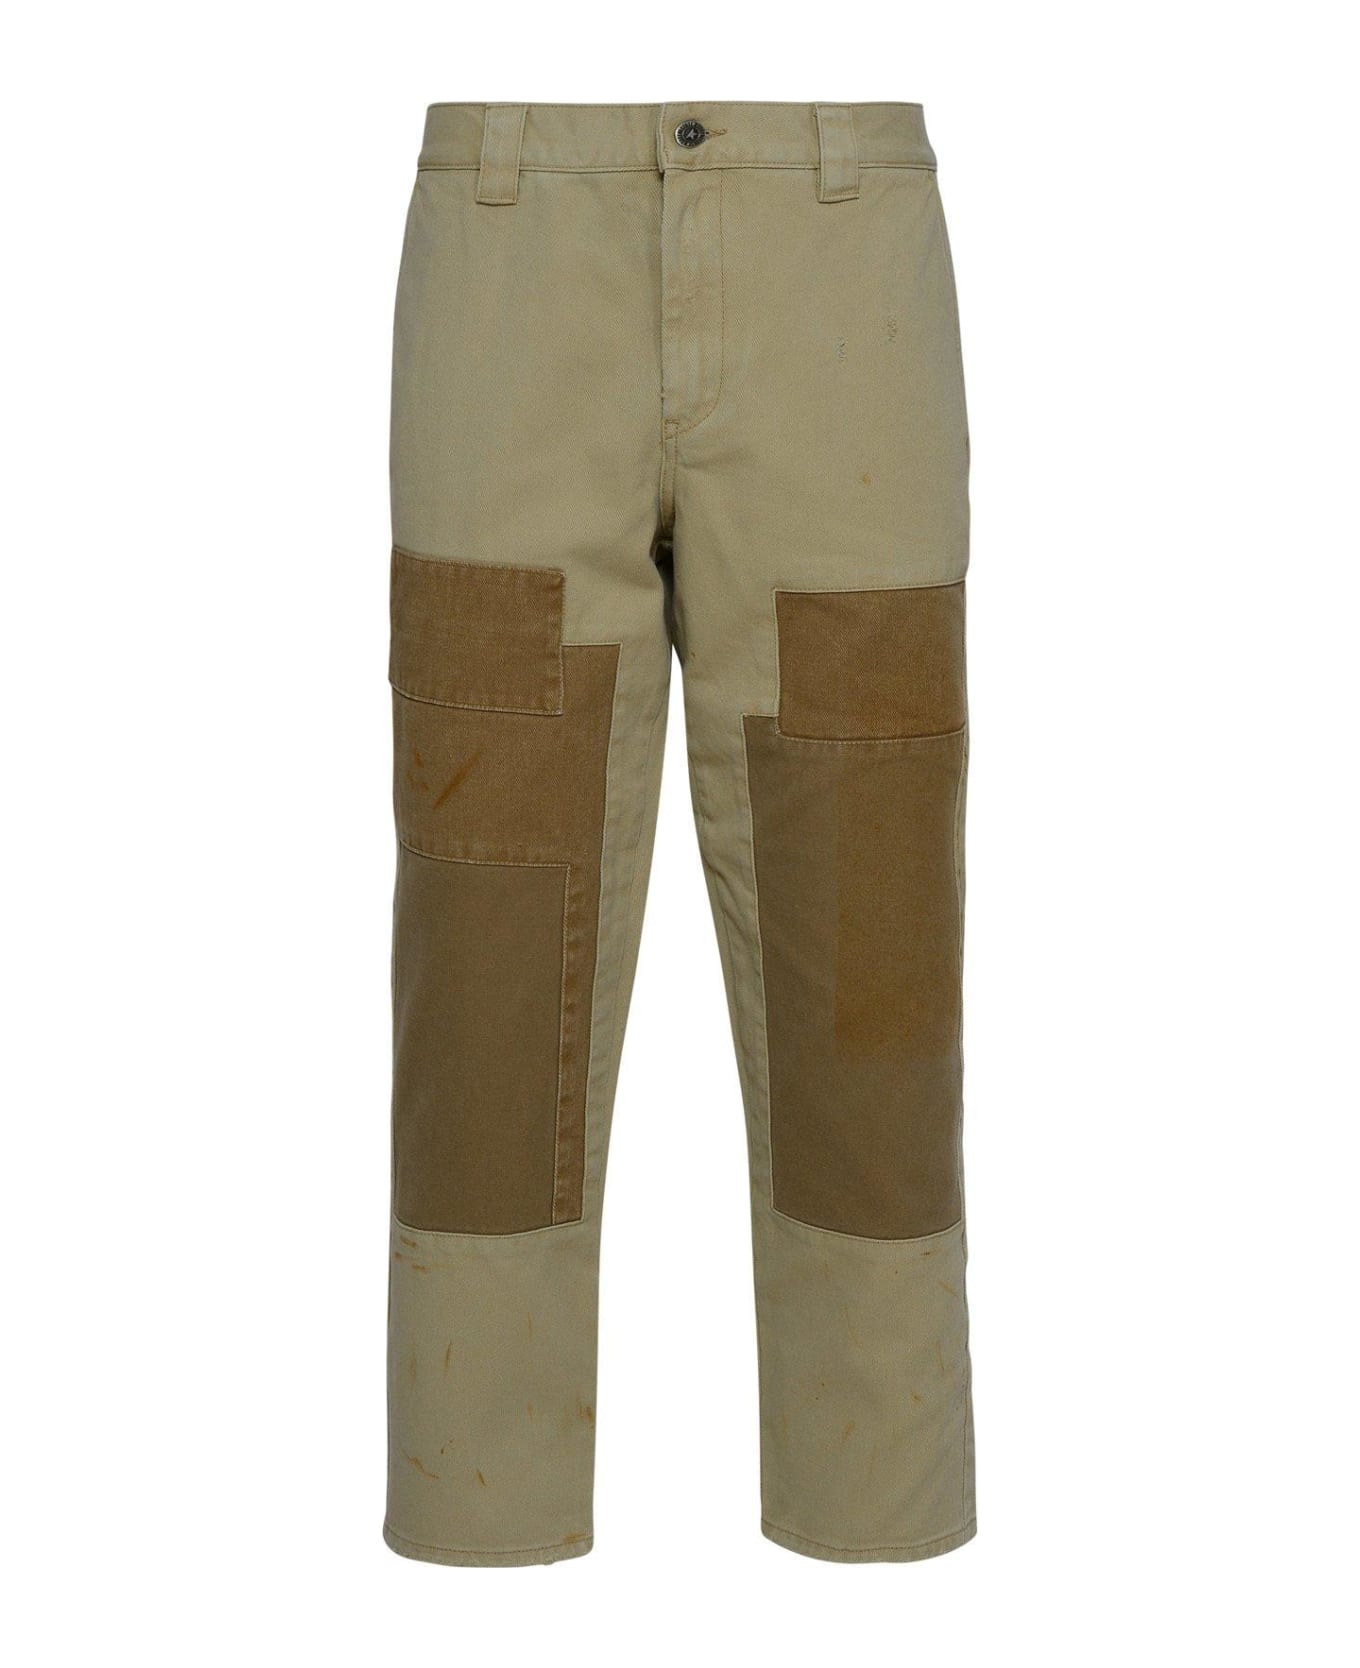 Golden Goose Panlled Trousers - Yellow Cream ボトムス